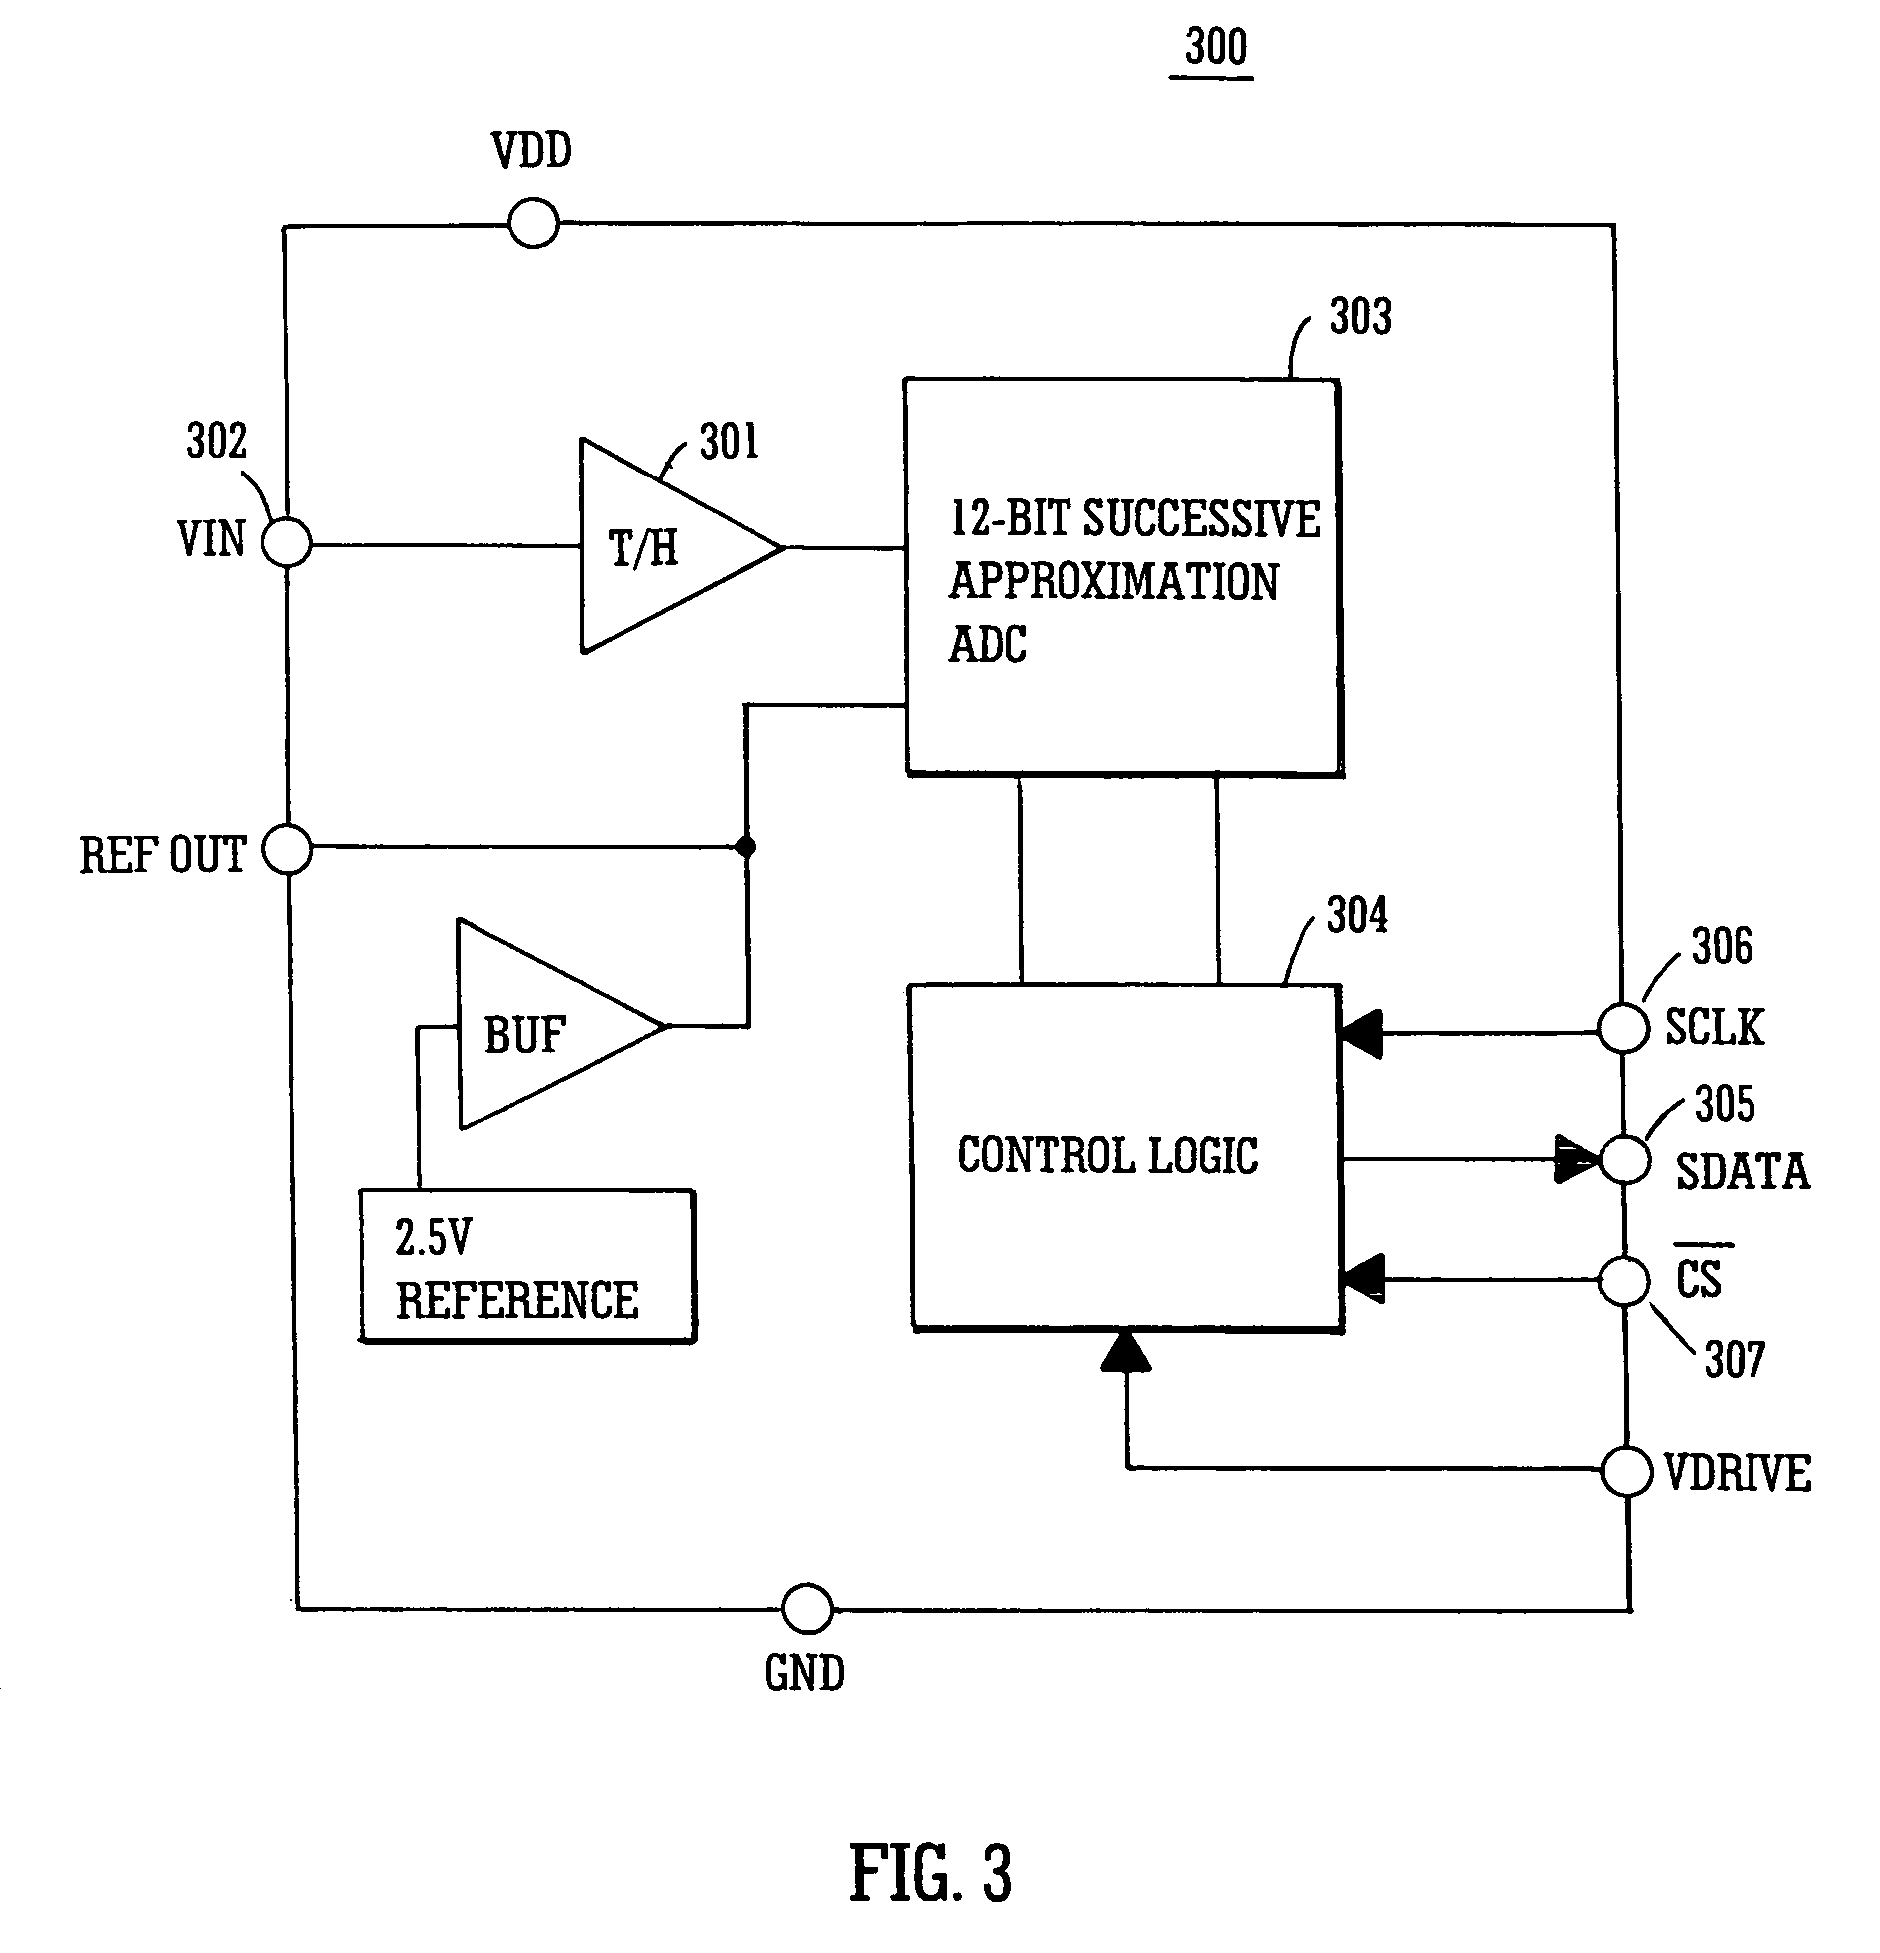 Method for placing a device in a selected mode of operation